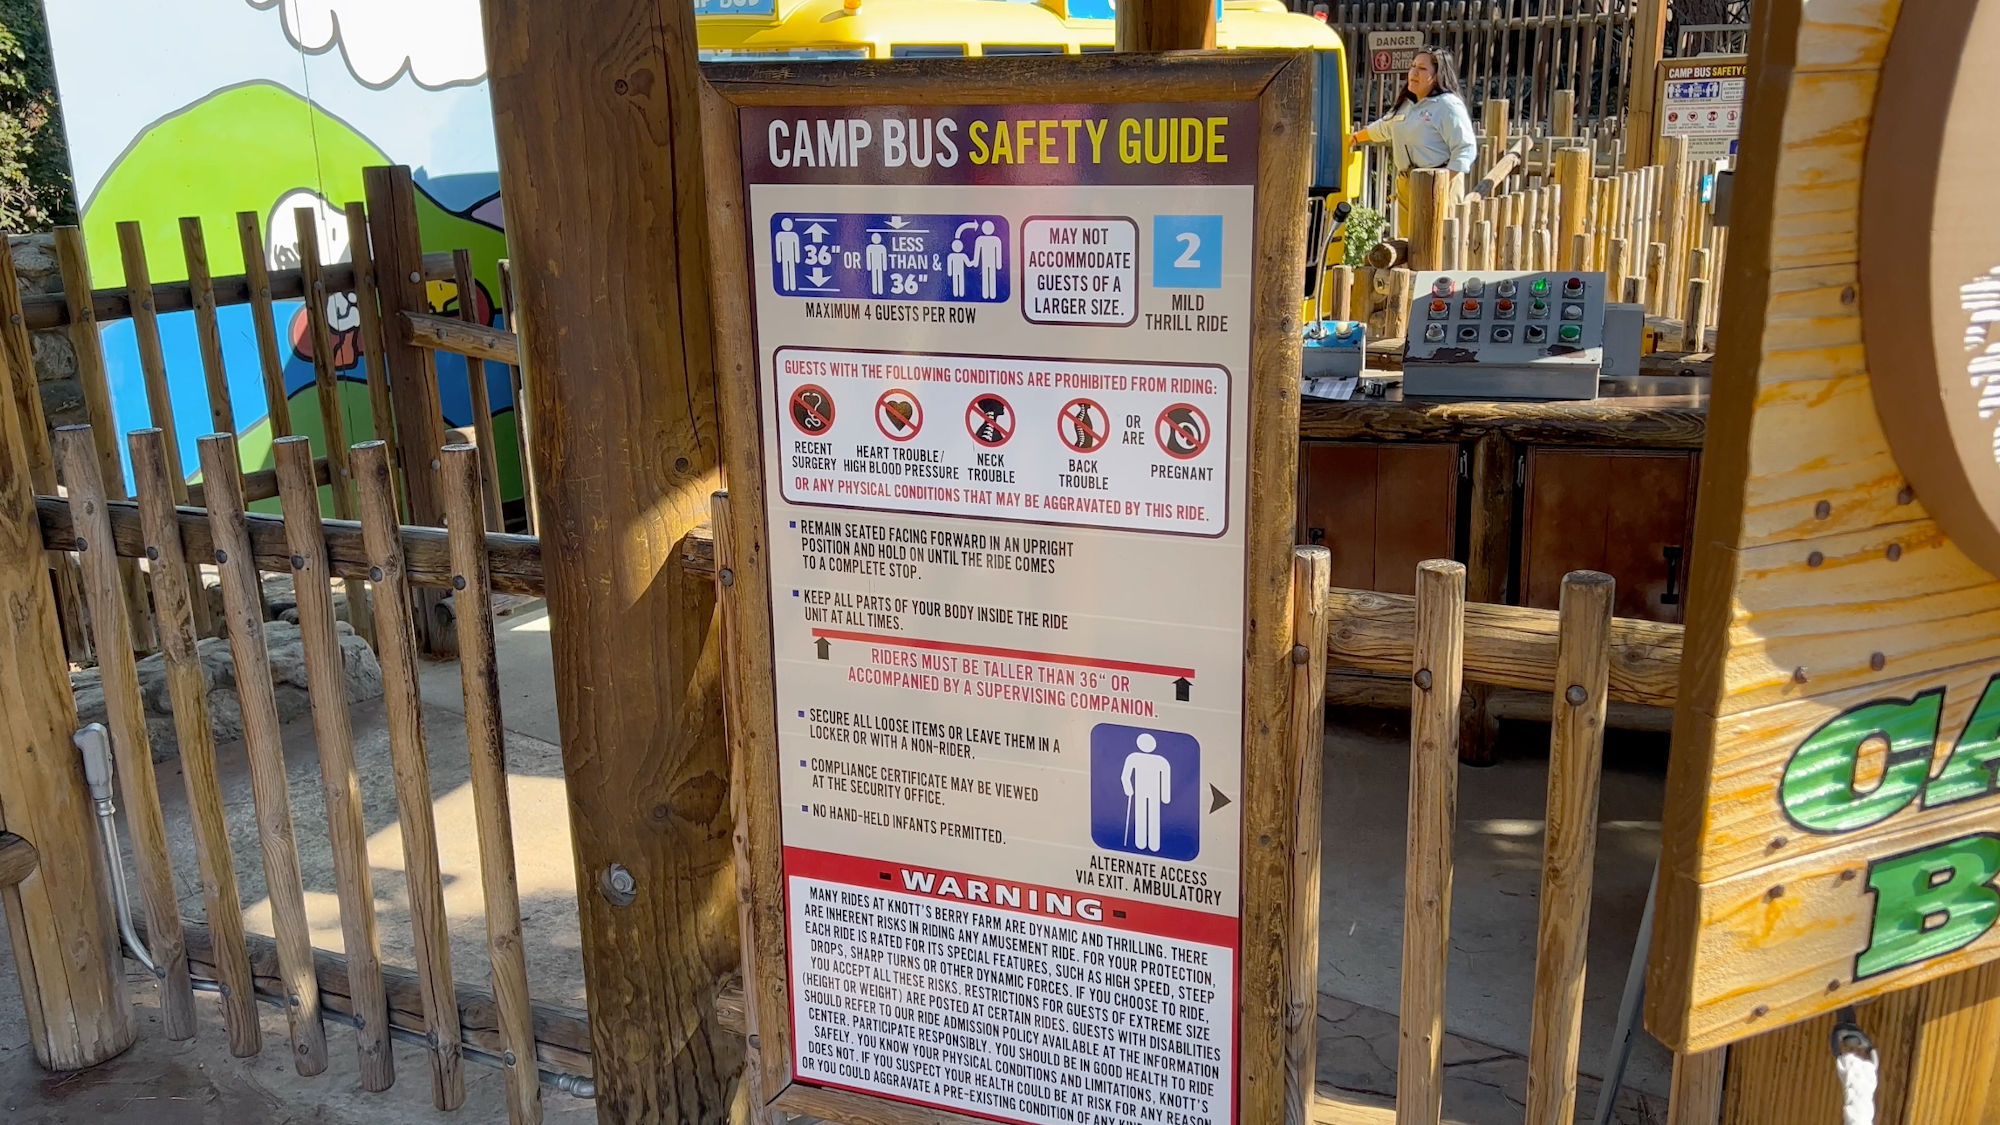 Camp Bus Safety Guide